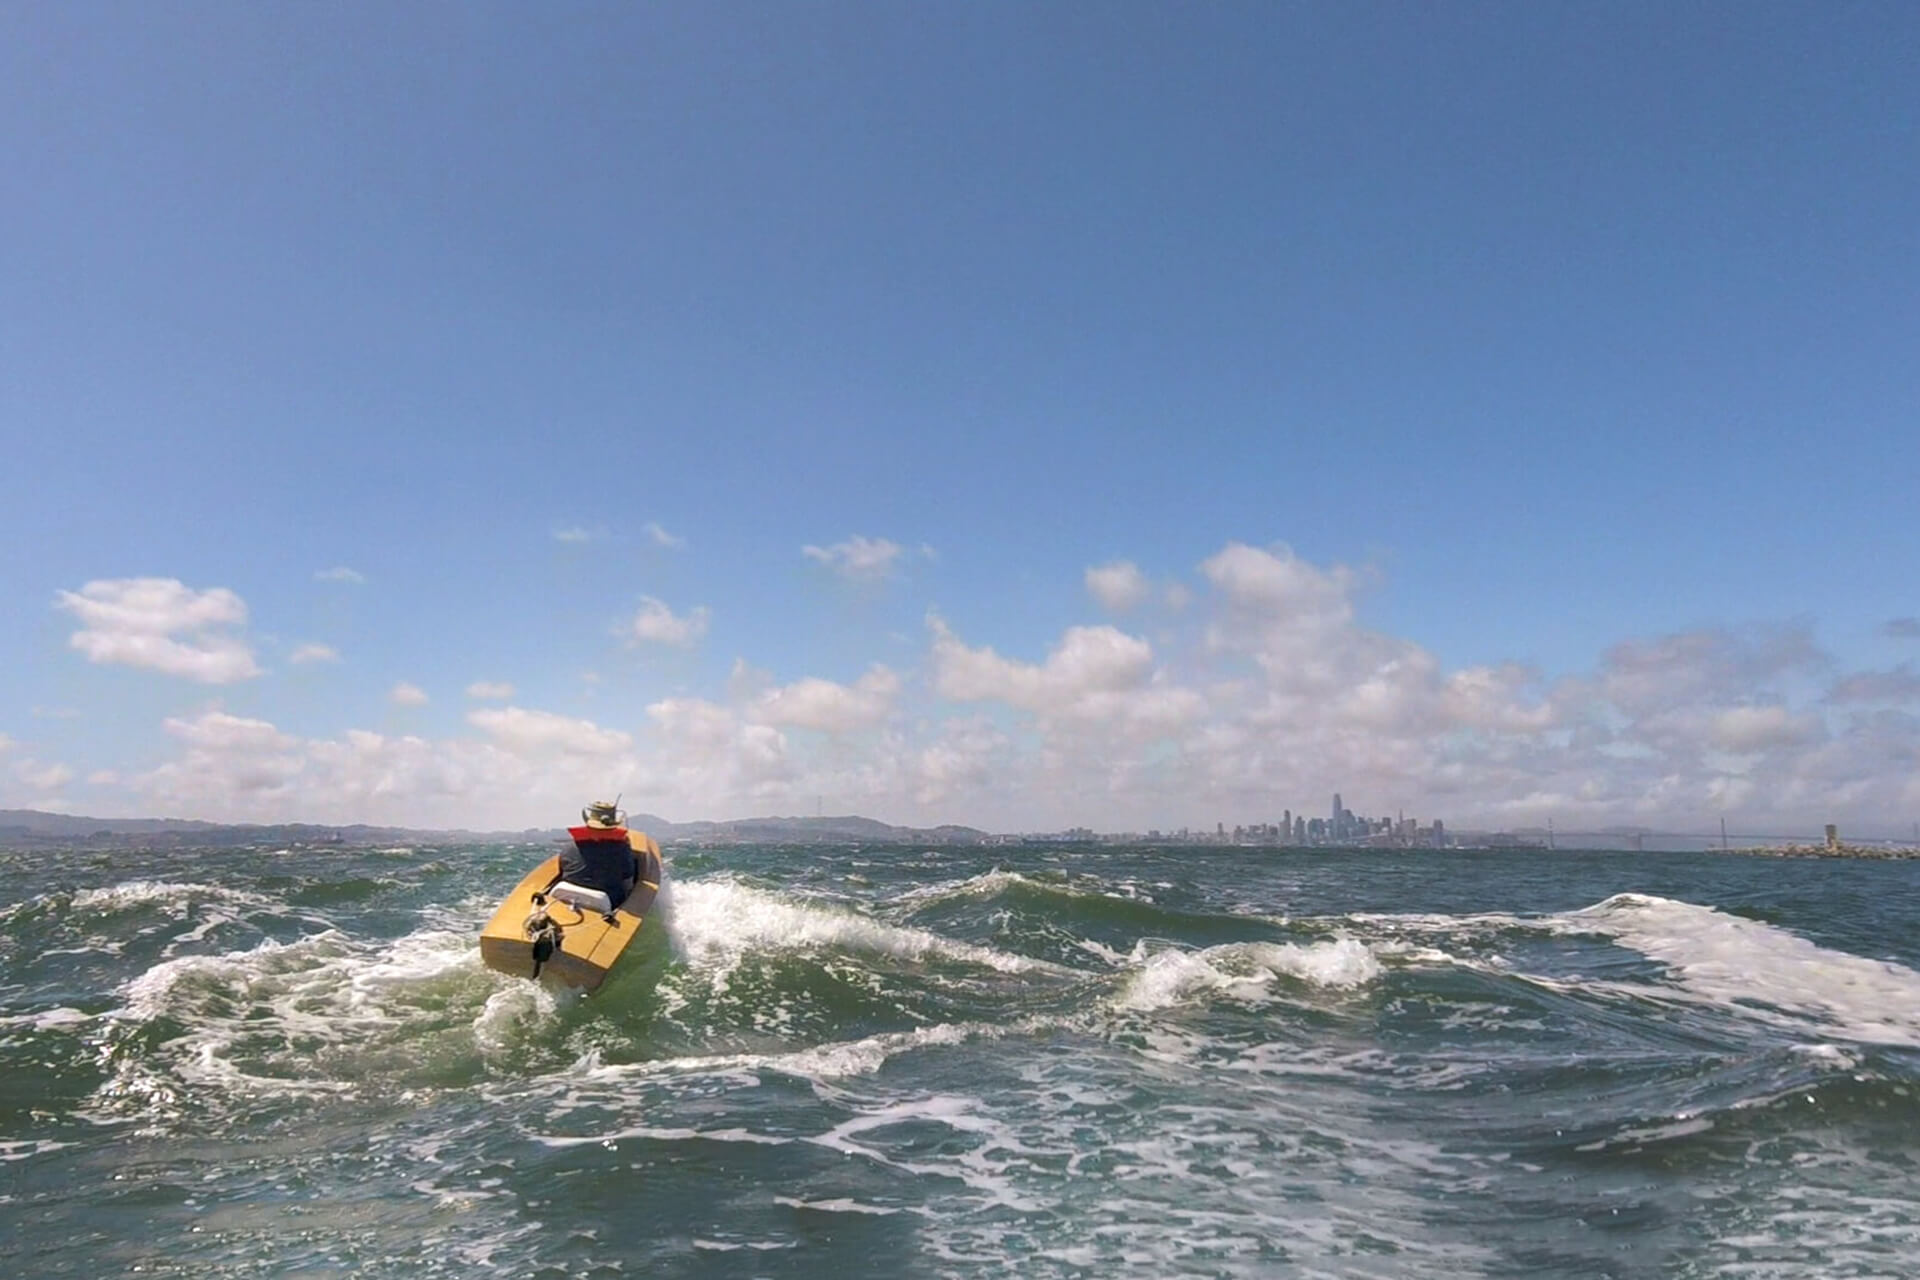 Dylan pushing his mini boat to the limits in the San Francisco Bay chop